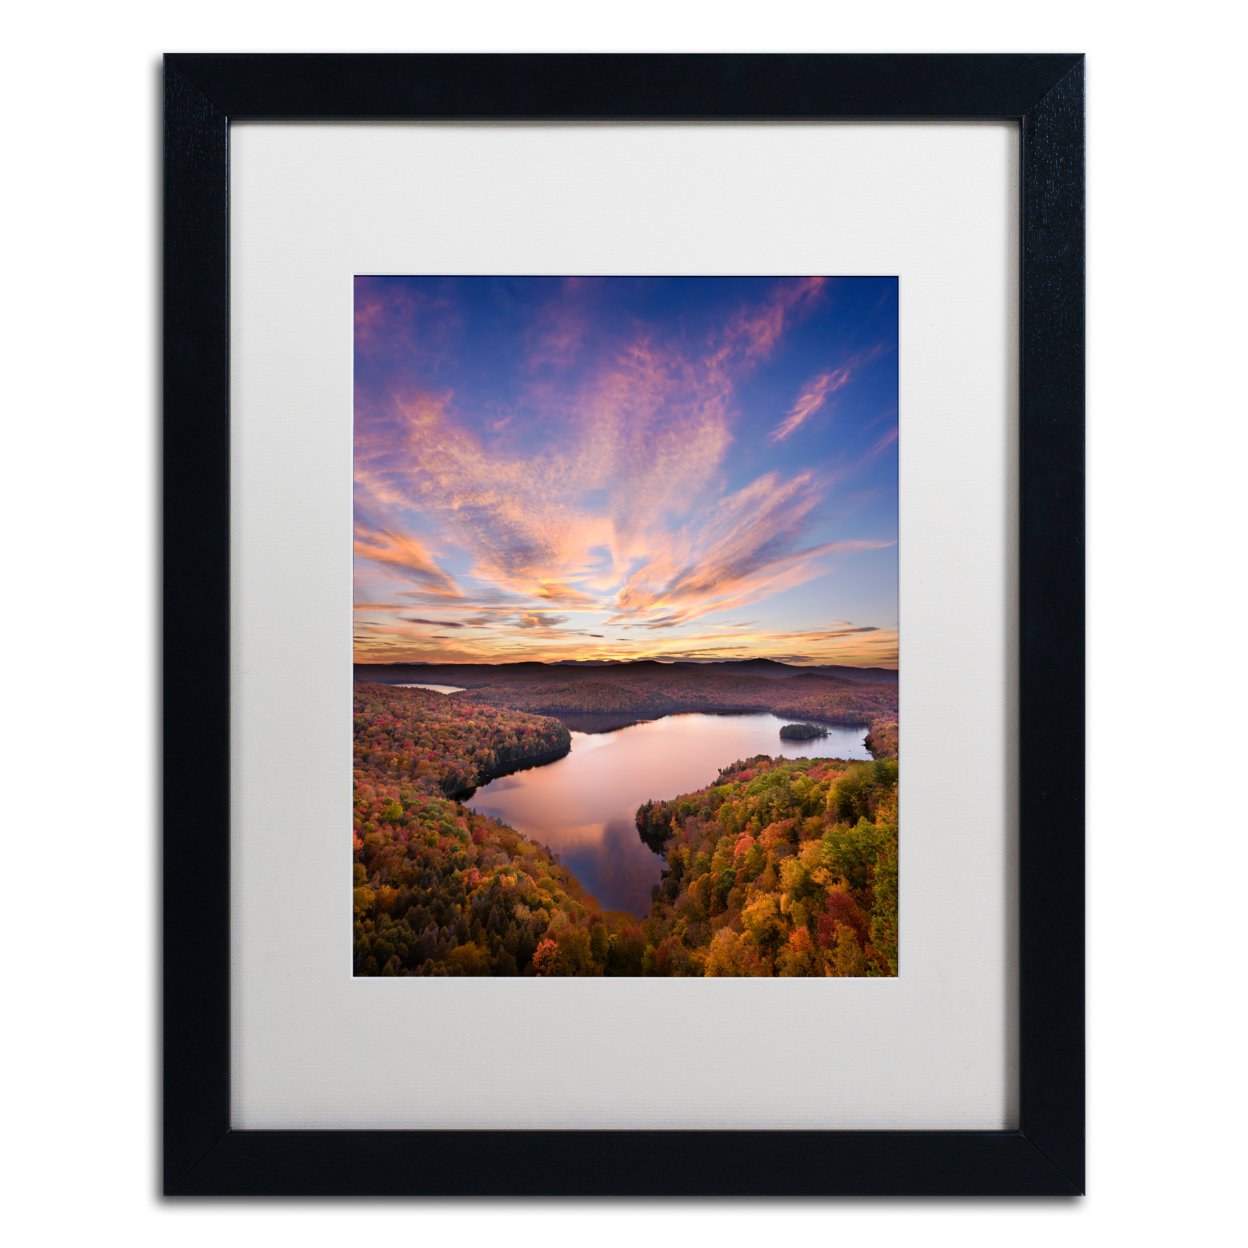 Michael Blanchette Photography 'View From The Ledge' Black Wooden Framed Art 18 X 22 Inches